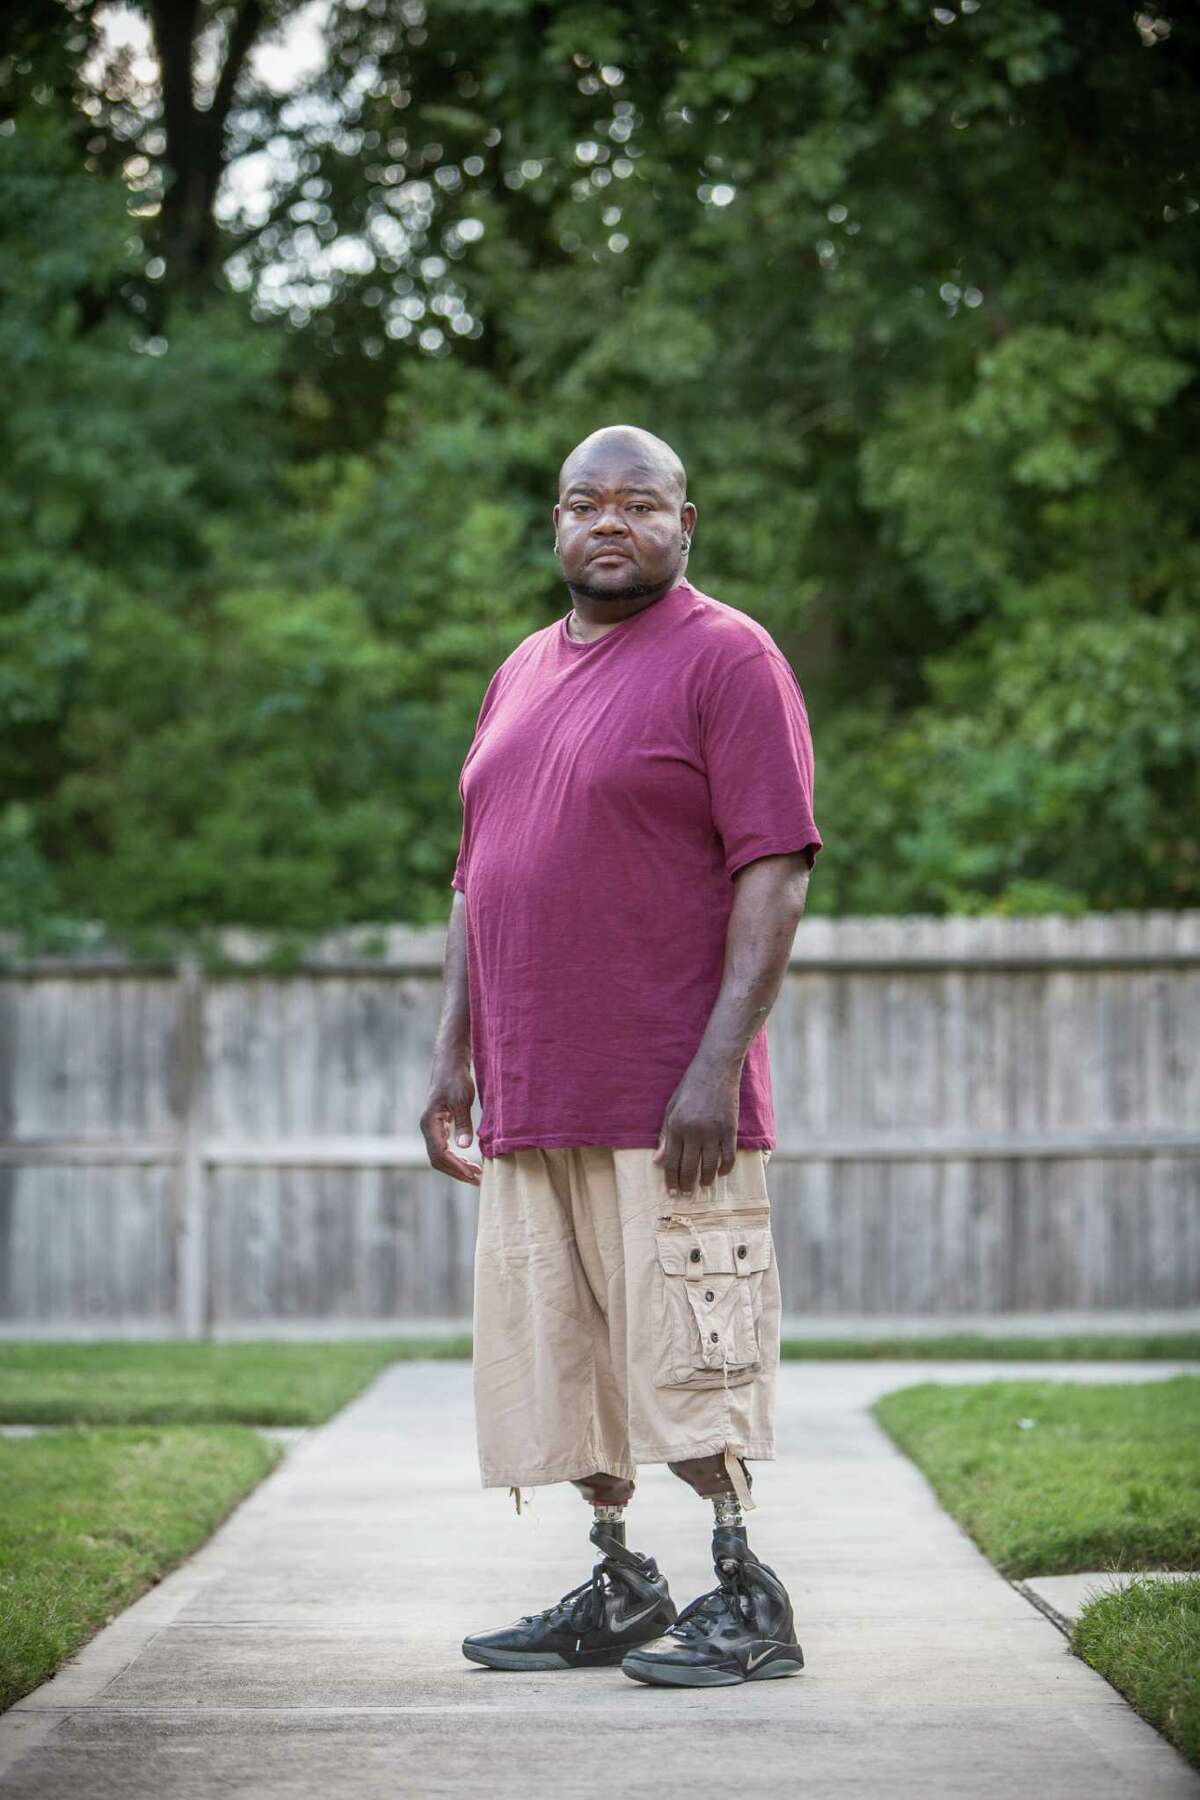 LeJuan Holmes, a diabetic and a candidate for a kidney transplant, tries to get on the list after having bariatric surgery to reduce his BMI and make him eligible. He is photographed near his home in Humble, TX Thursday October 9th 2014. (Michael Starghill, Jr.)